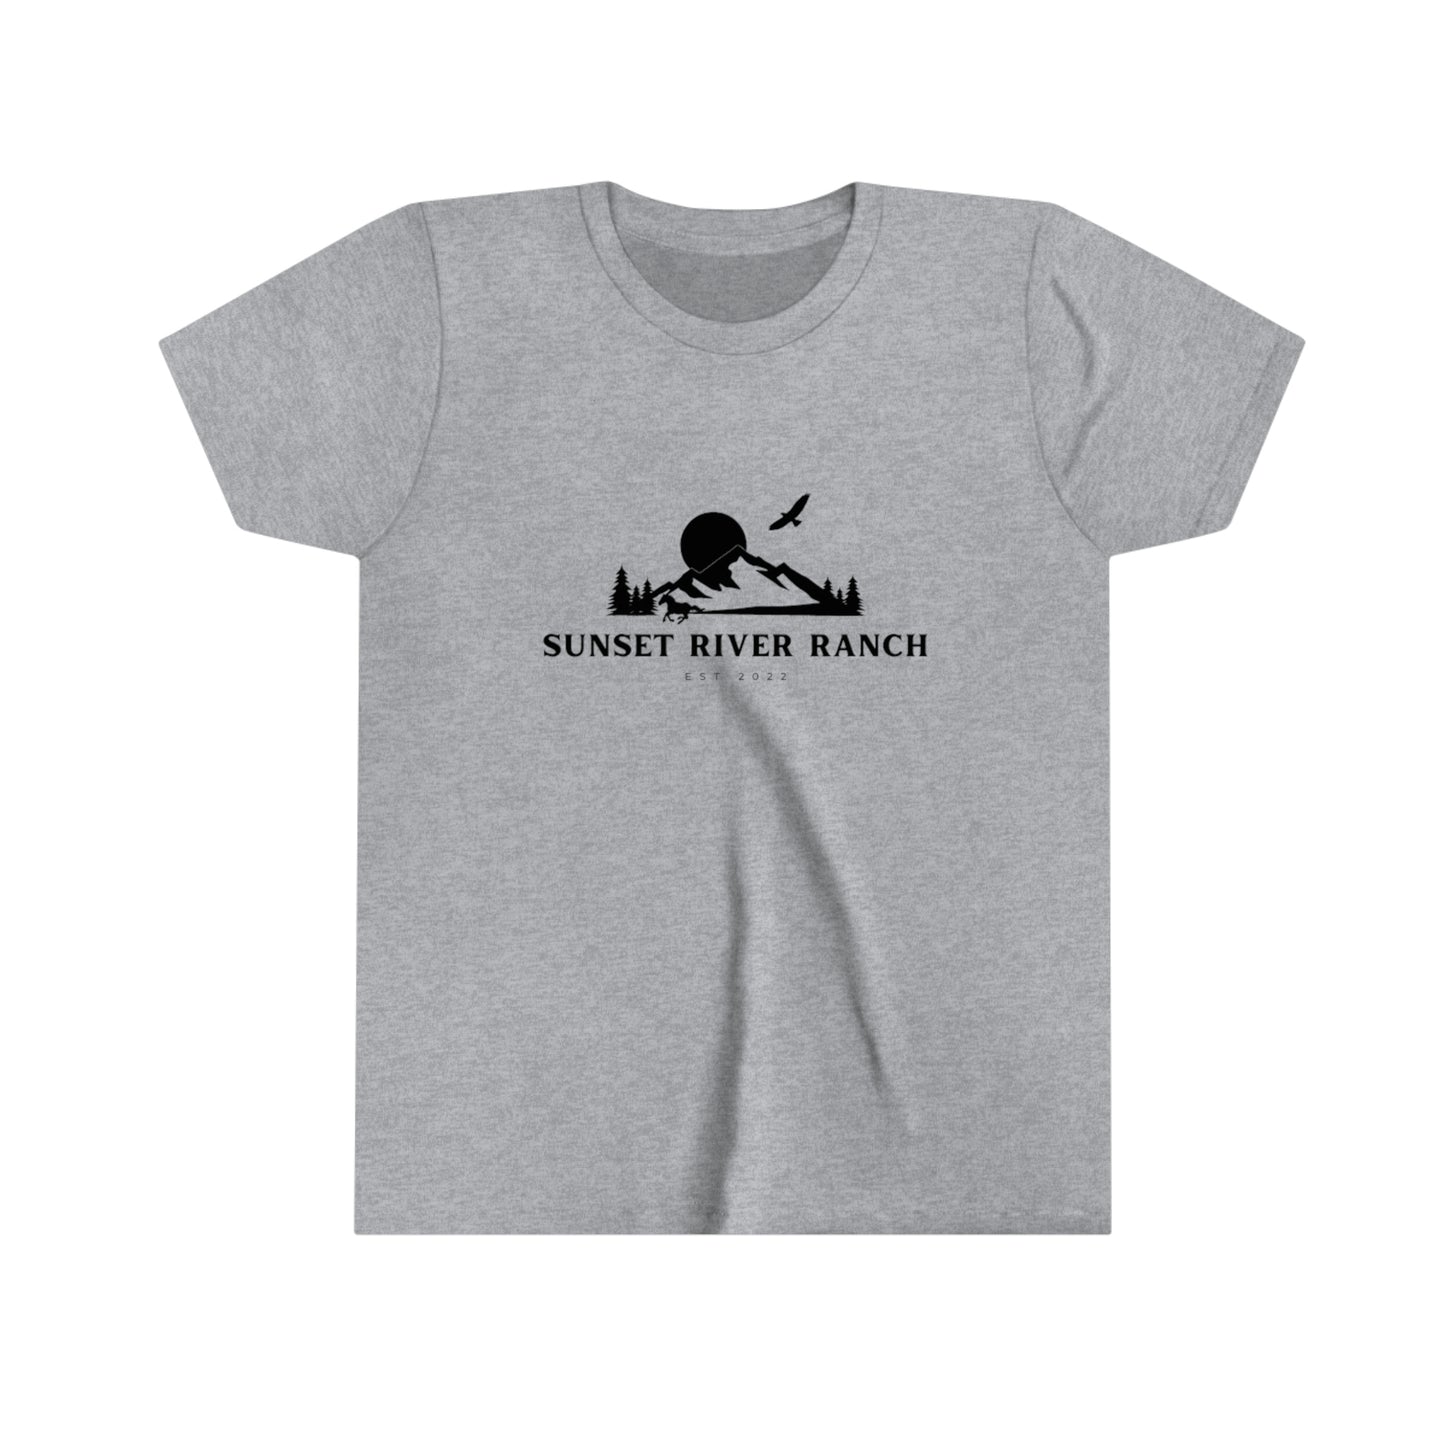 Sunset River Ranch Youth Short Sleeve Tee; Branded T-shirt; Horse Ranch T-shirt; Western T-shirt